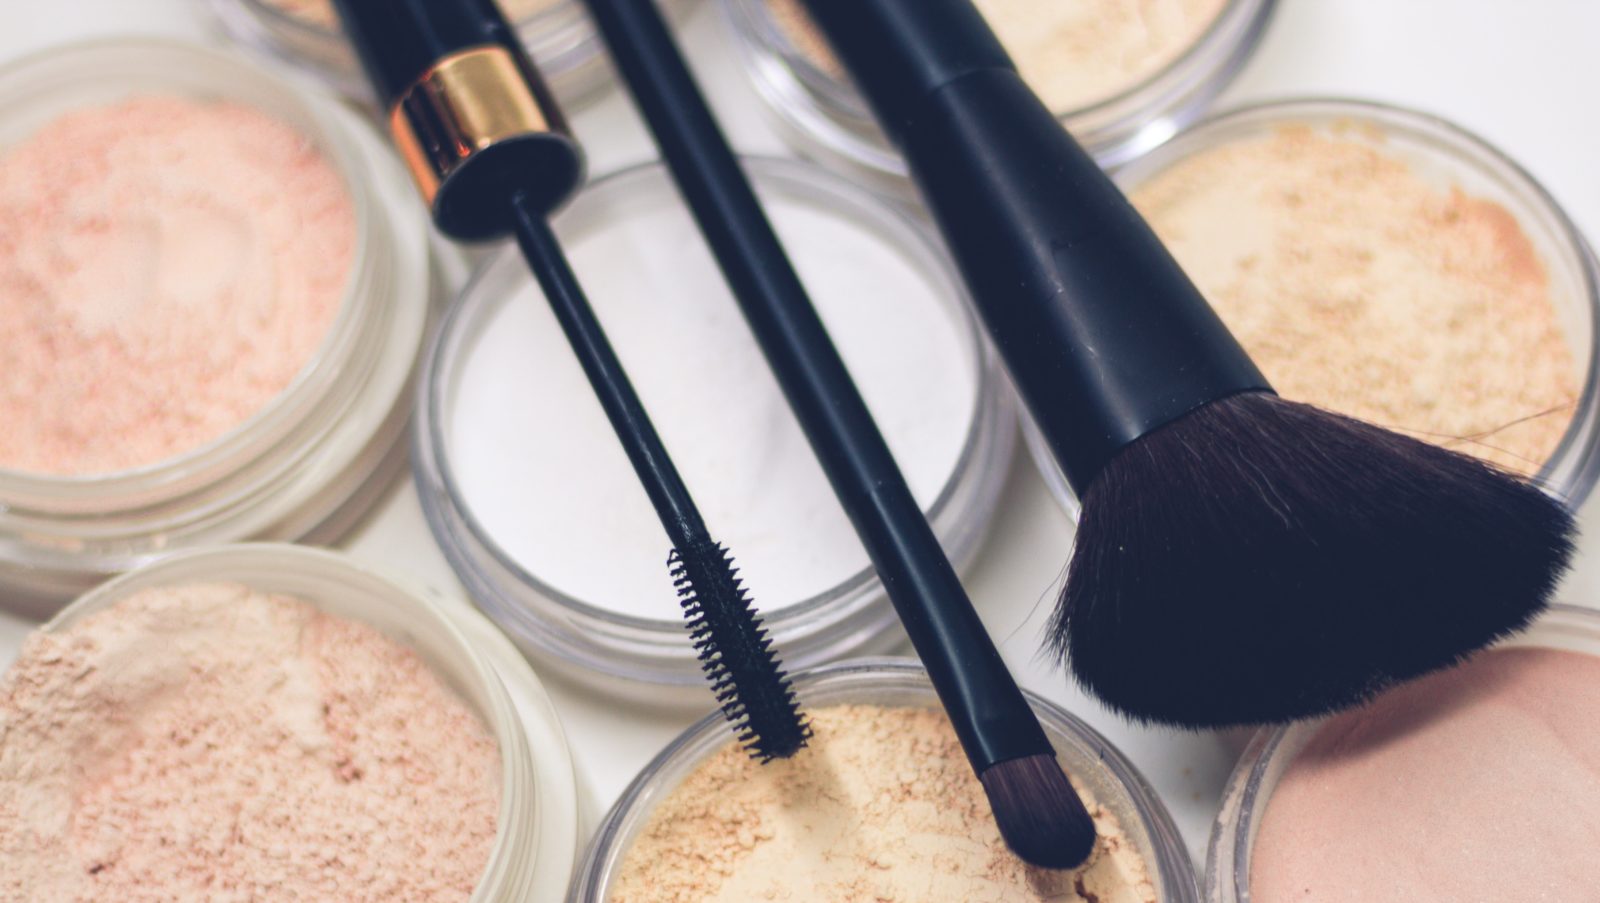 Can the beauty industry break its addiction to ‘Gift with Purchase’?